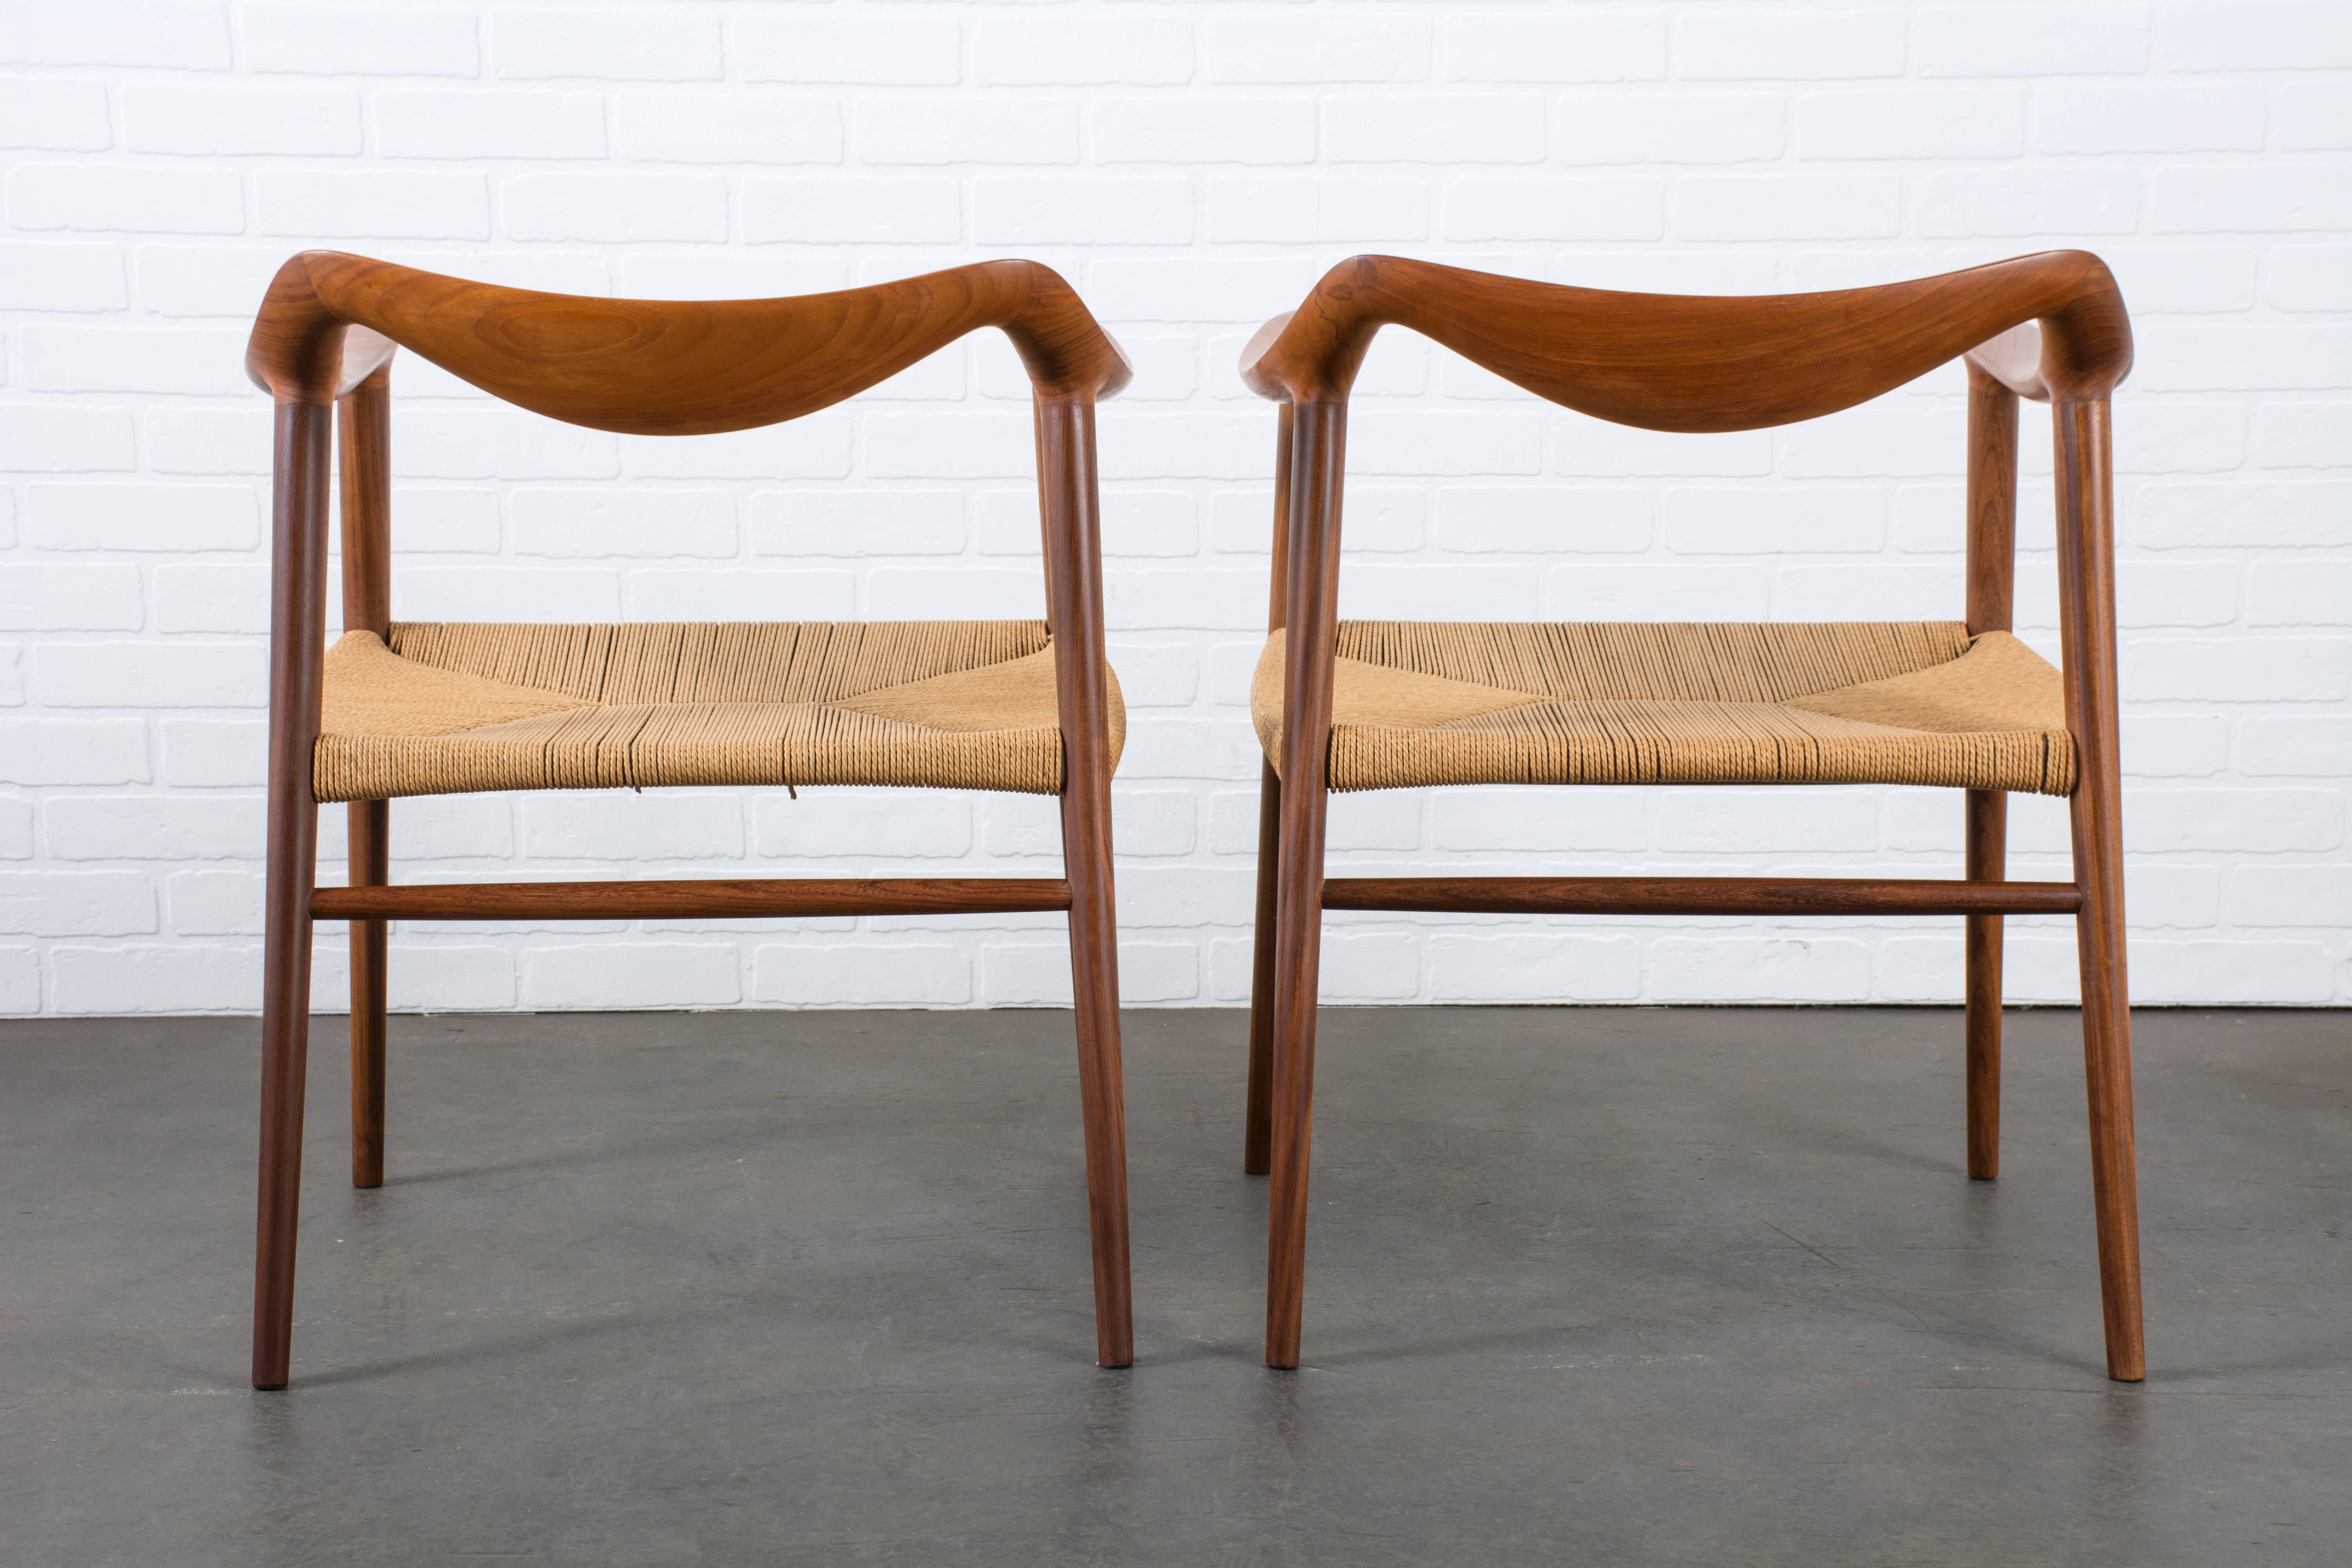 Mid-20th Century Pair of Vintage Bambi Chairs by Rolf Rastad & Adolf Relling for Gustav Bahus